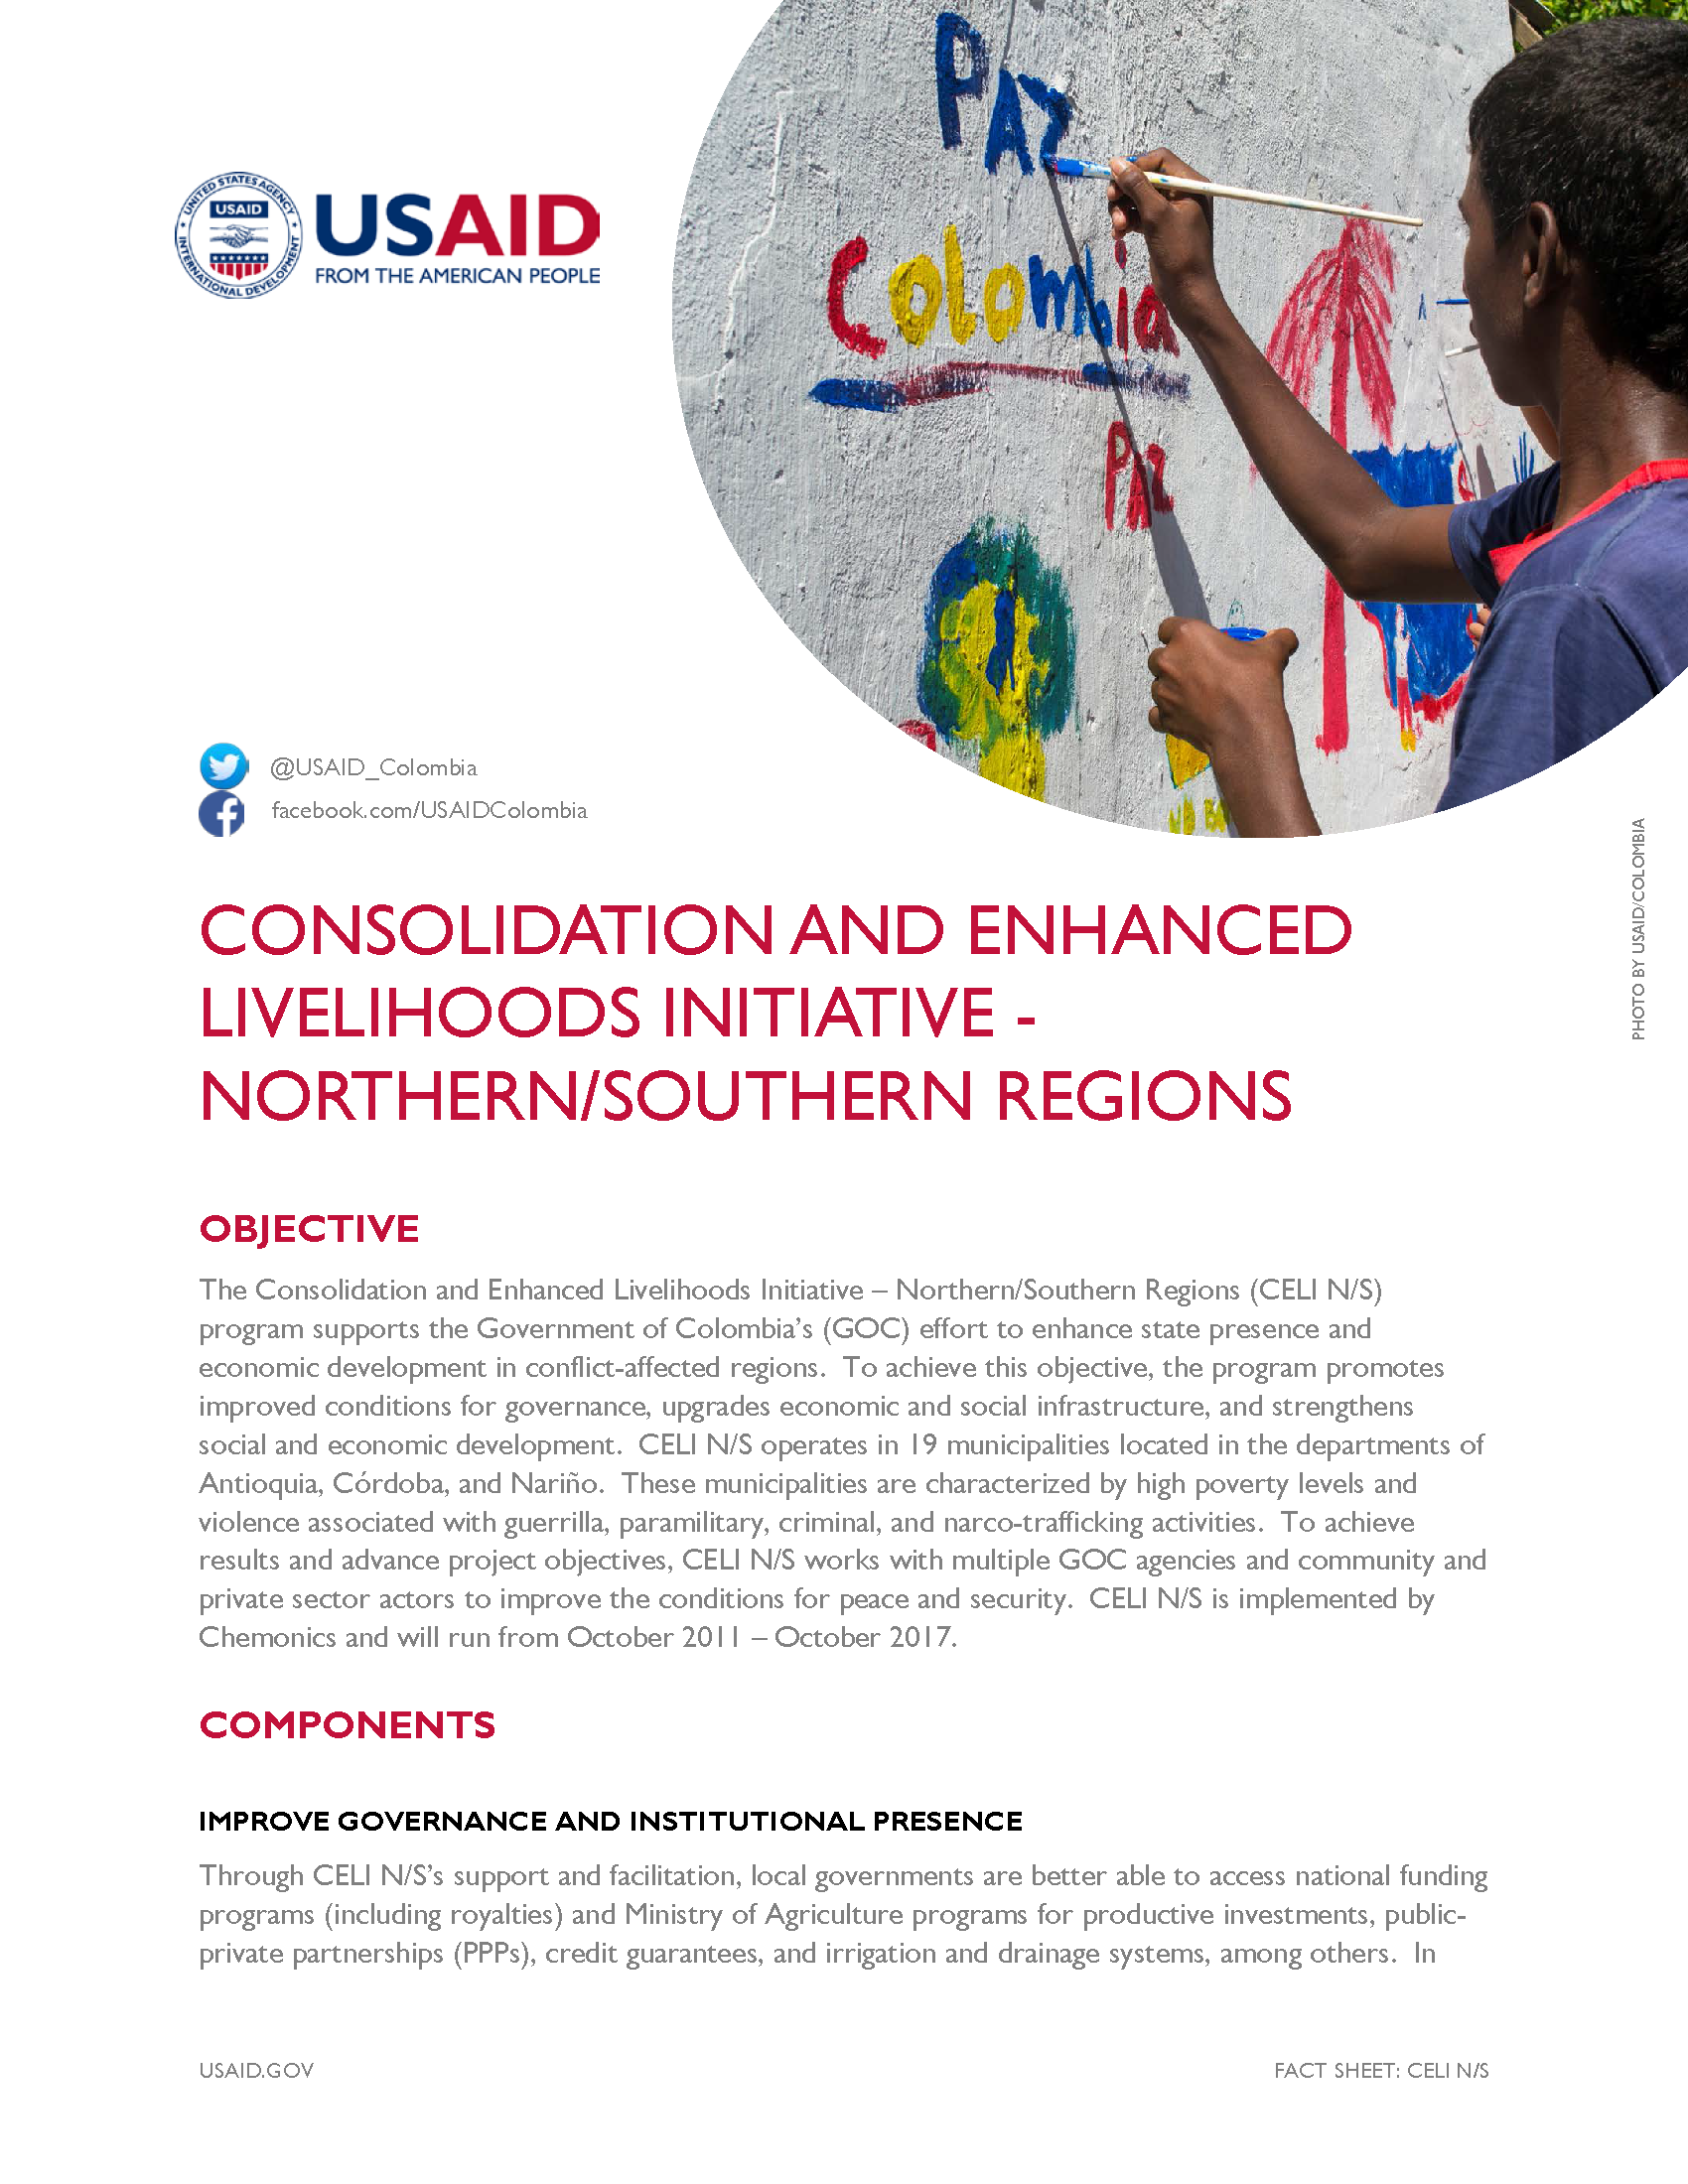 Consolidation and Enhanced Livelihoods Initiative - Northern/Southern Regions Fact Sheet